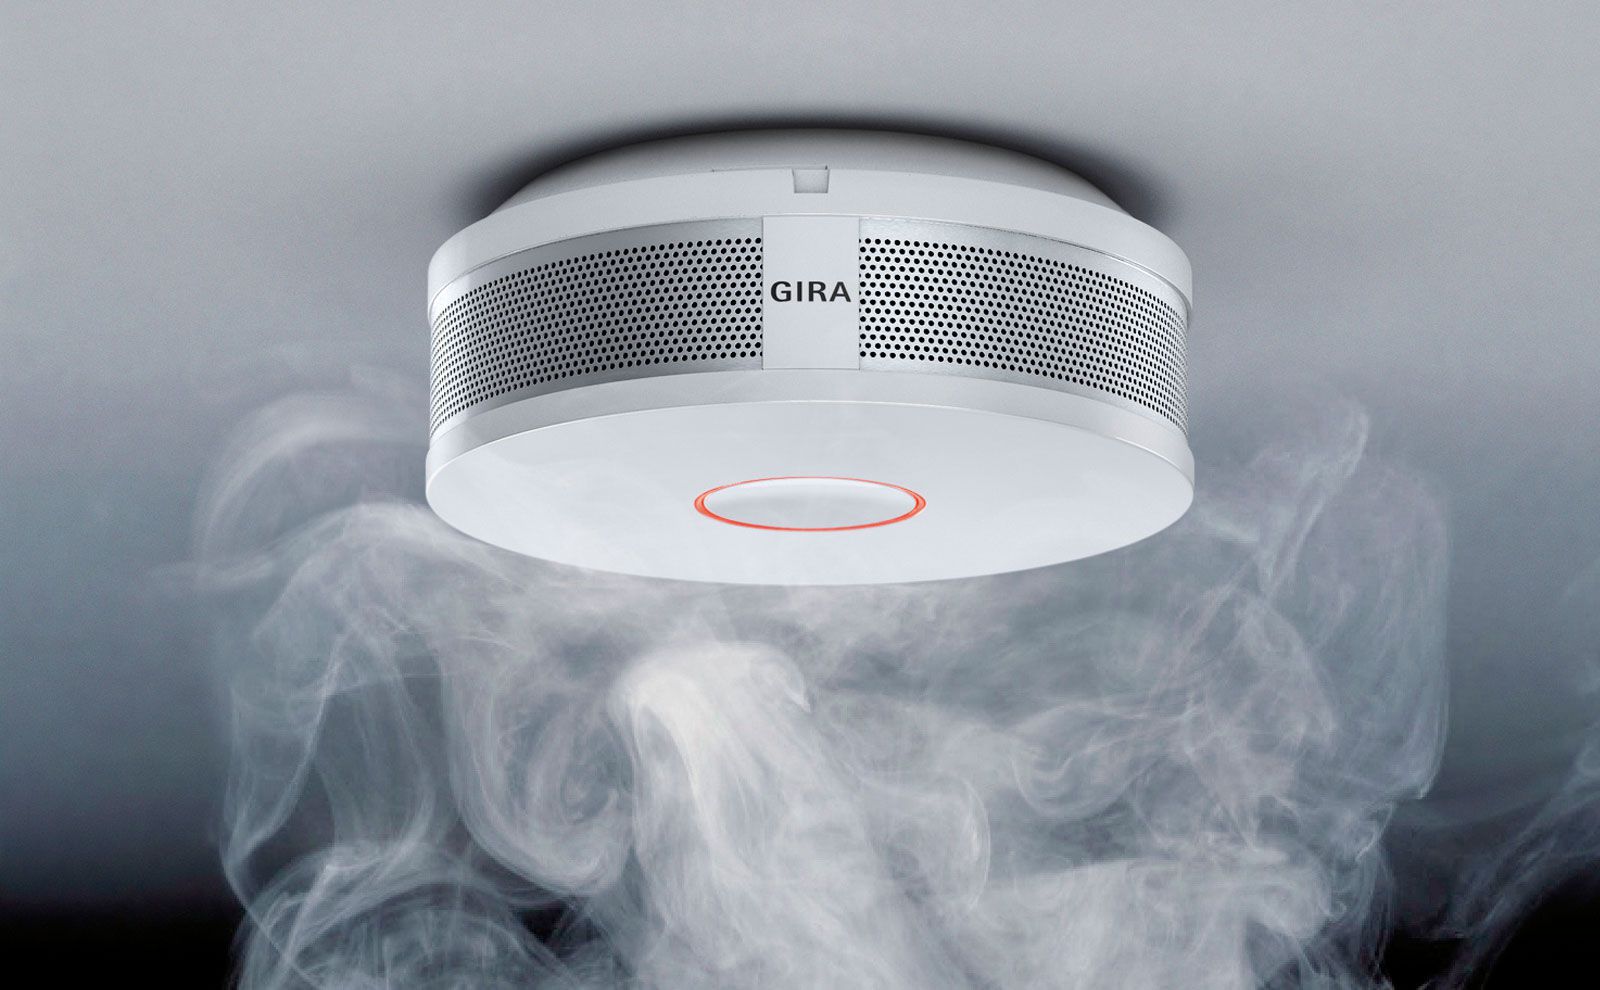 Stay safe: the Gira Basic Q and Dual Q smoke alarm devices are designed to reliably detect the signs of a fire and to warn you ahead of time.